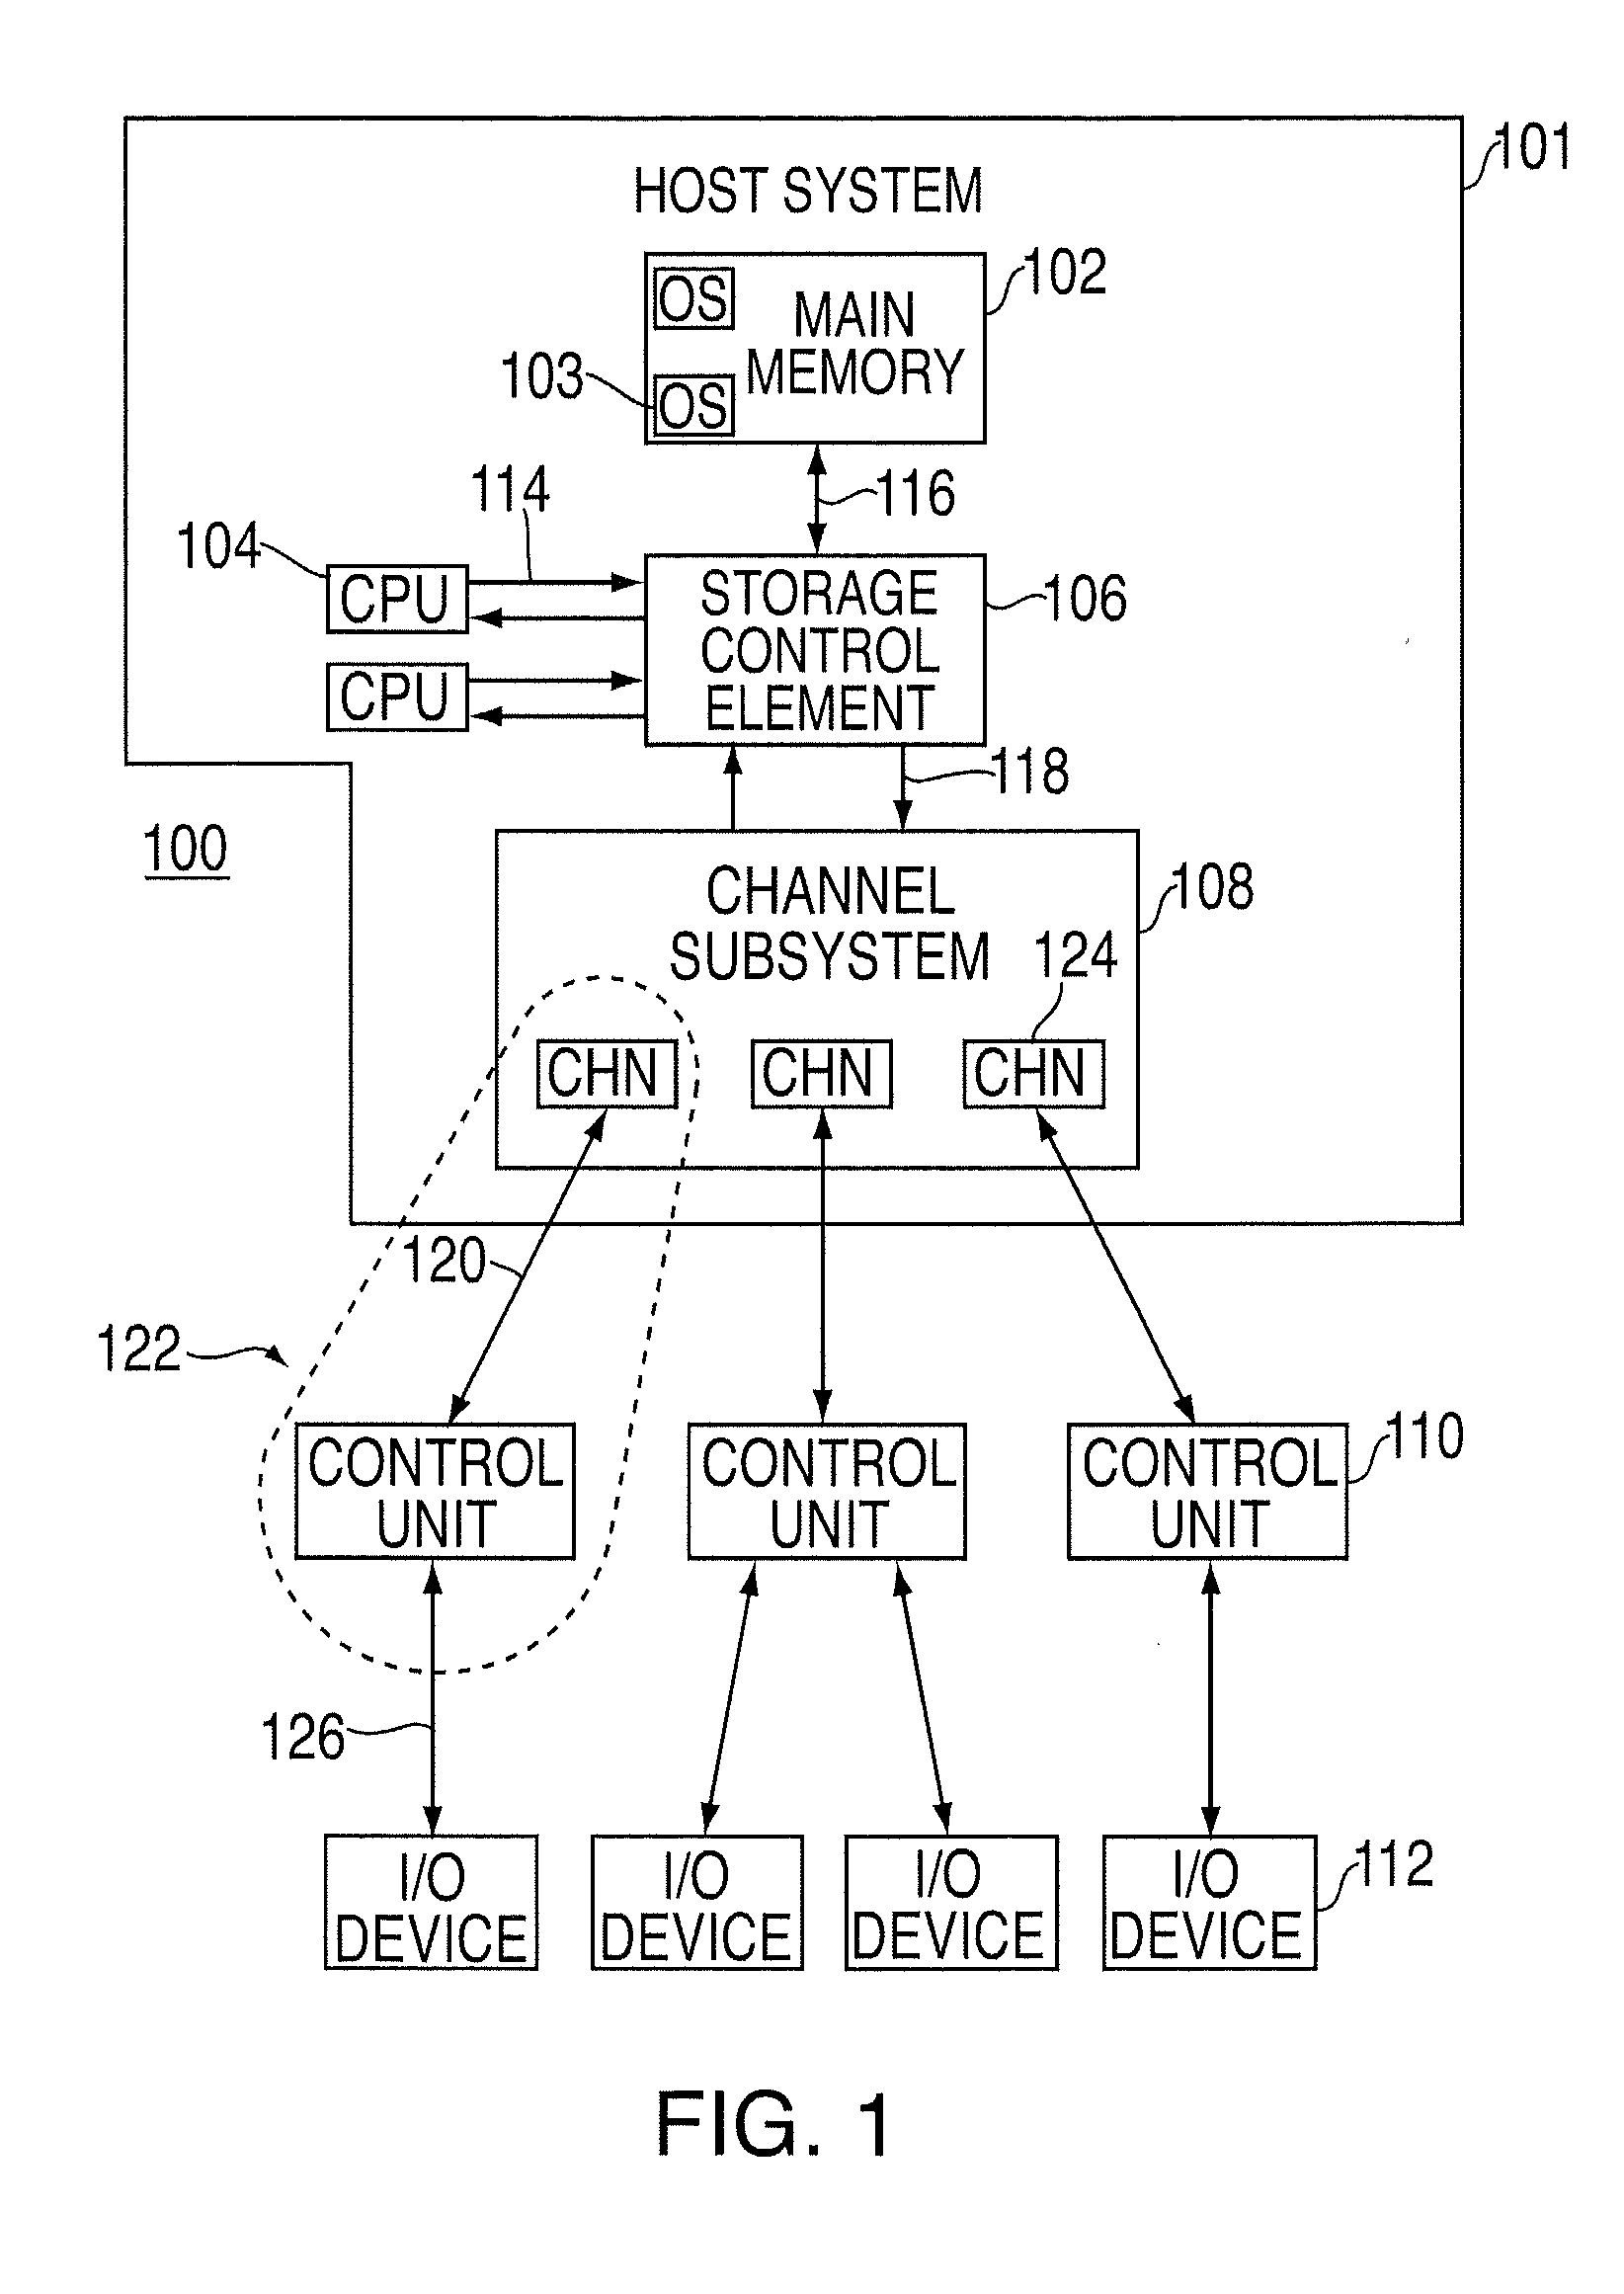 Processing of data to perform system changes in an input/output processing system